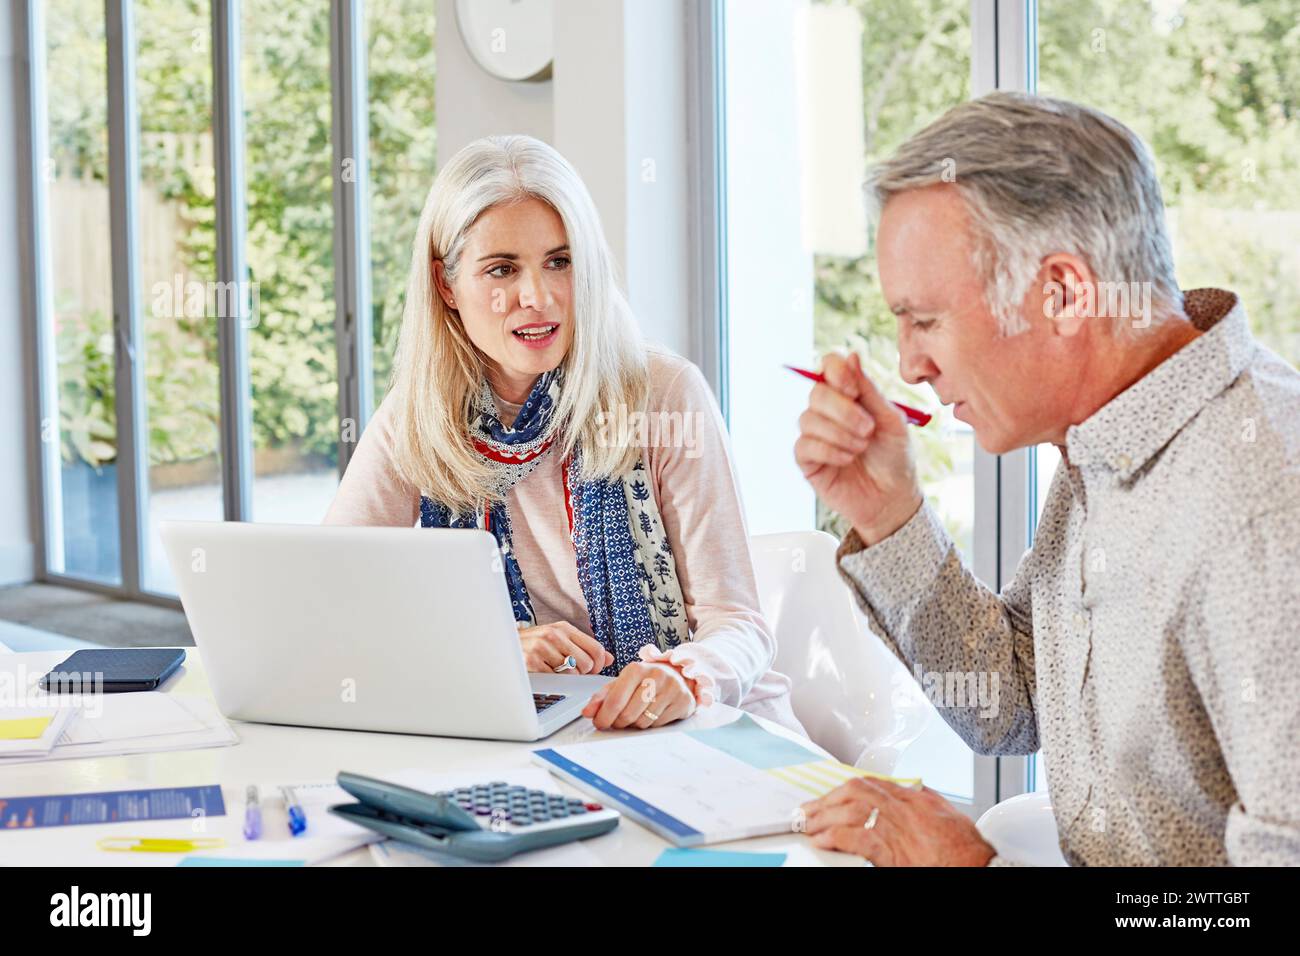 Two adults discussing work at a bright office Stock Photo